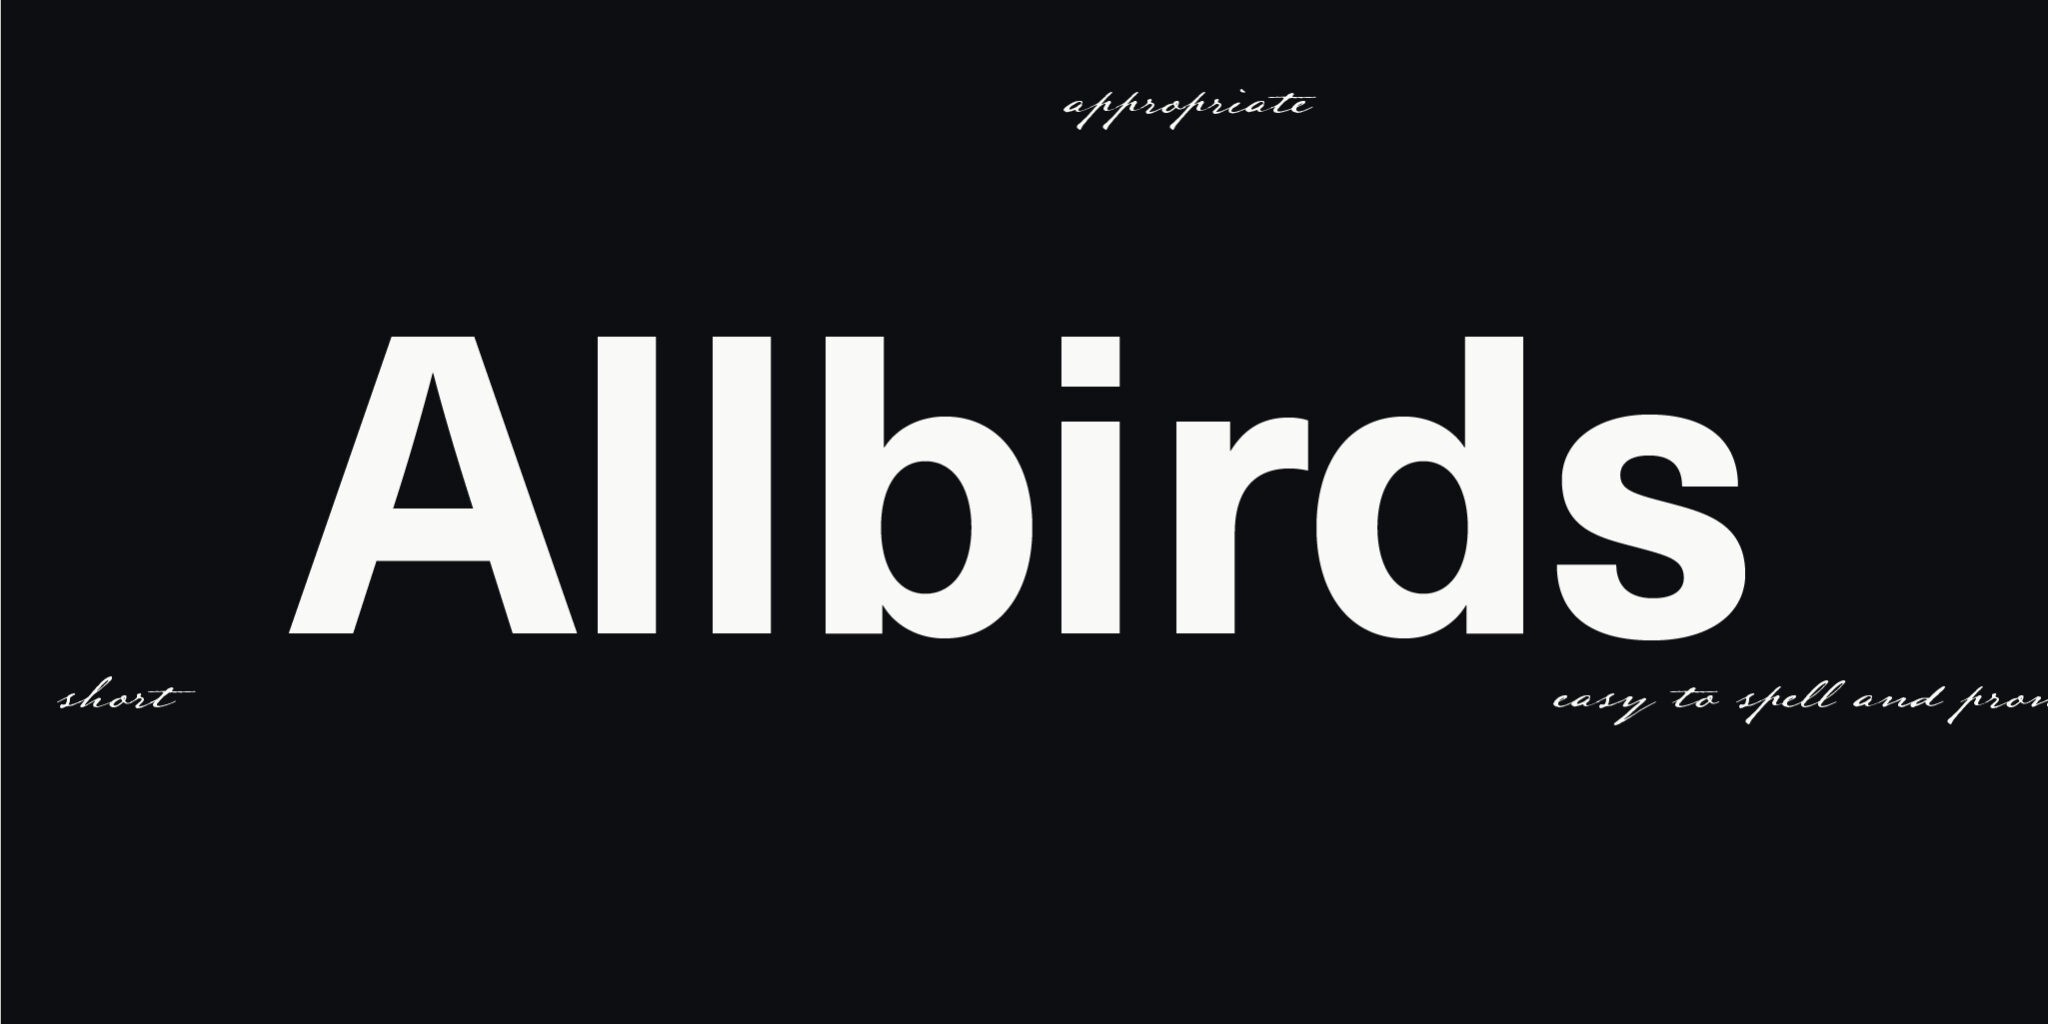 The image features the brand name 'Allbirds' in bold typography, with a variety of smaller text elements positioned around it. The smaller text elements highlight the attributes that contribute to creating a strong brand name.